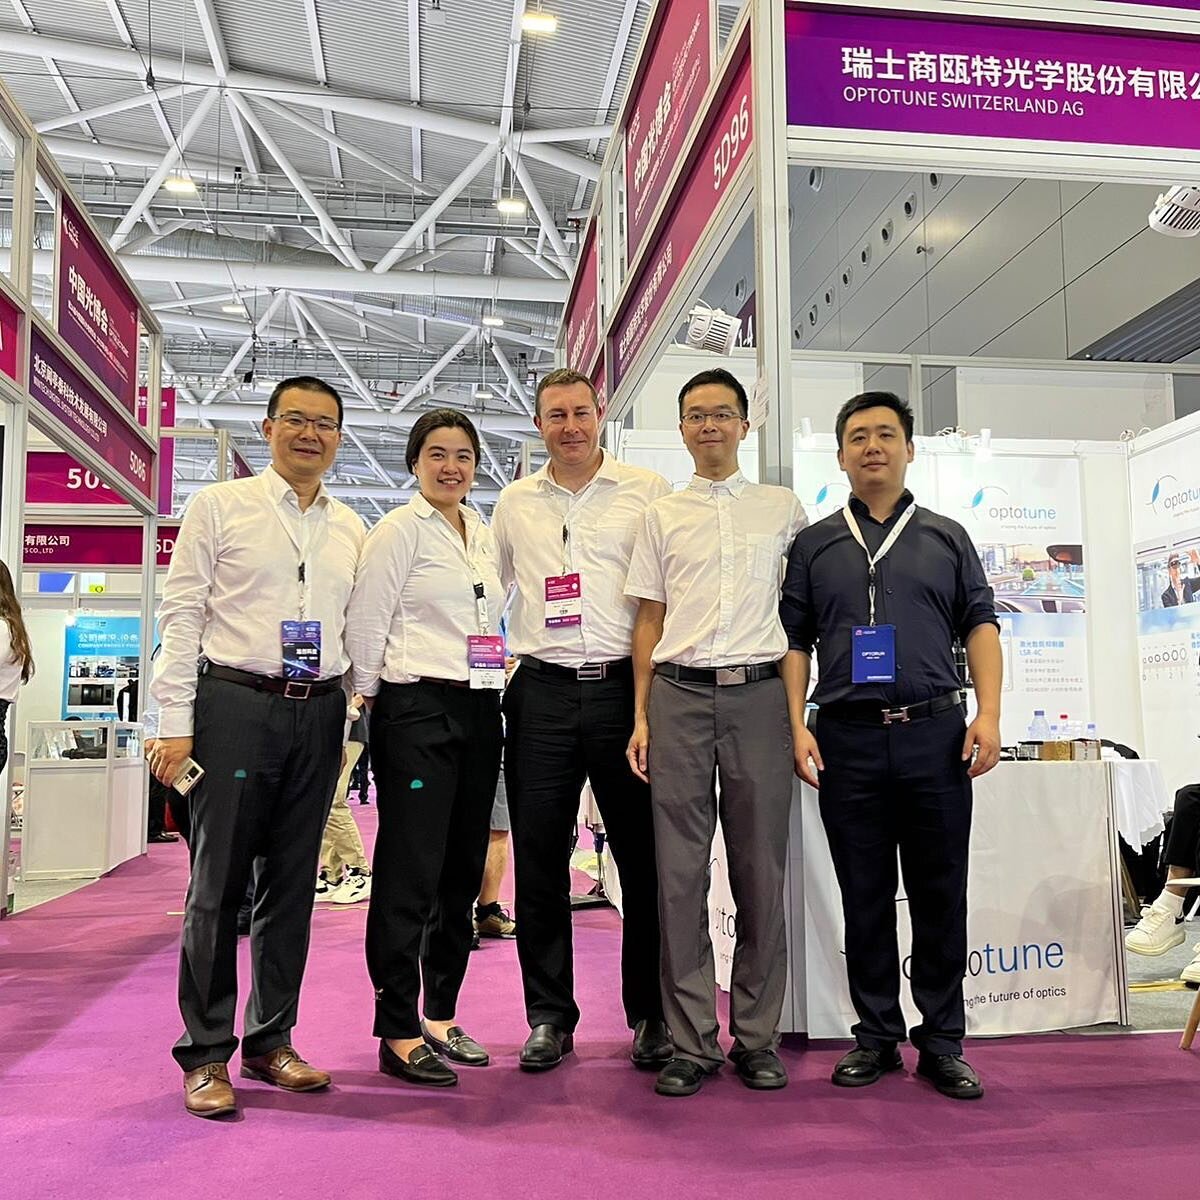 Optotune&rsquo;s CEO Manuel Aschwanden and the Optotune Asia team are at CIOE (China International Optoelectronic Exposition) bringing you our latest innovations and connecting with industry leaders.  Swing by our Booth to meet them! Hall5, Booth #5D